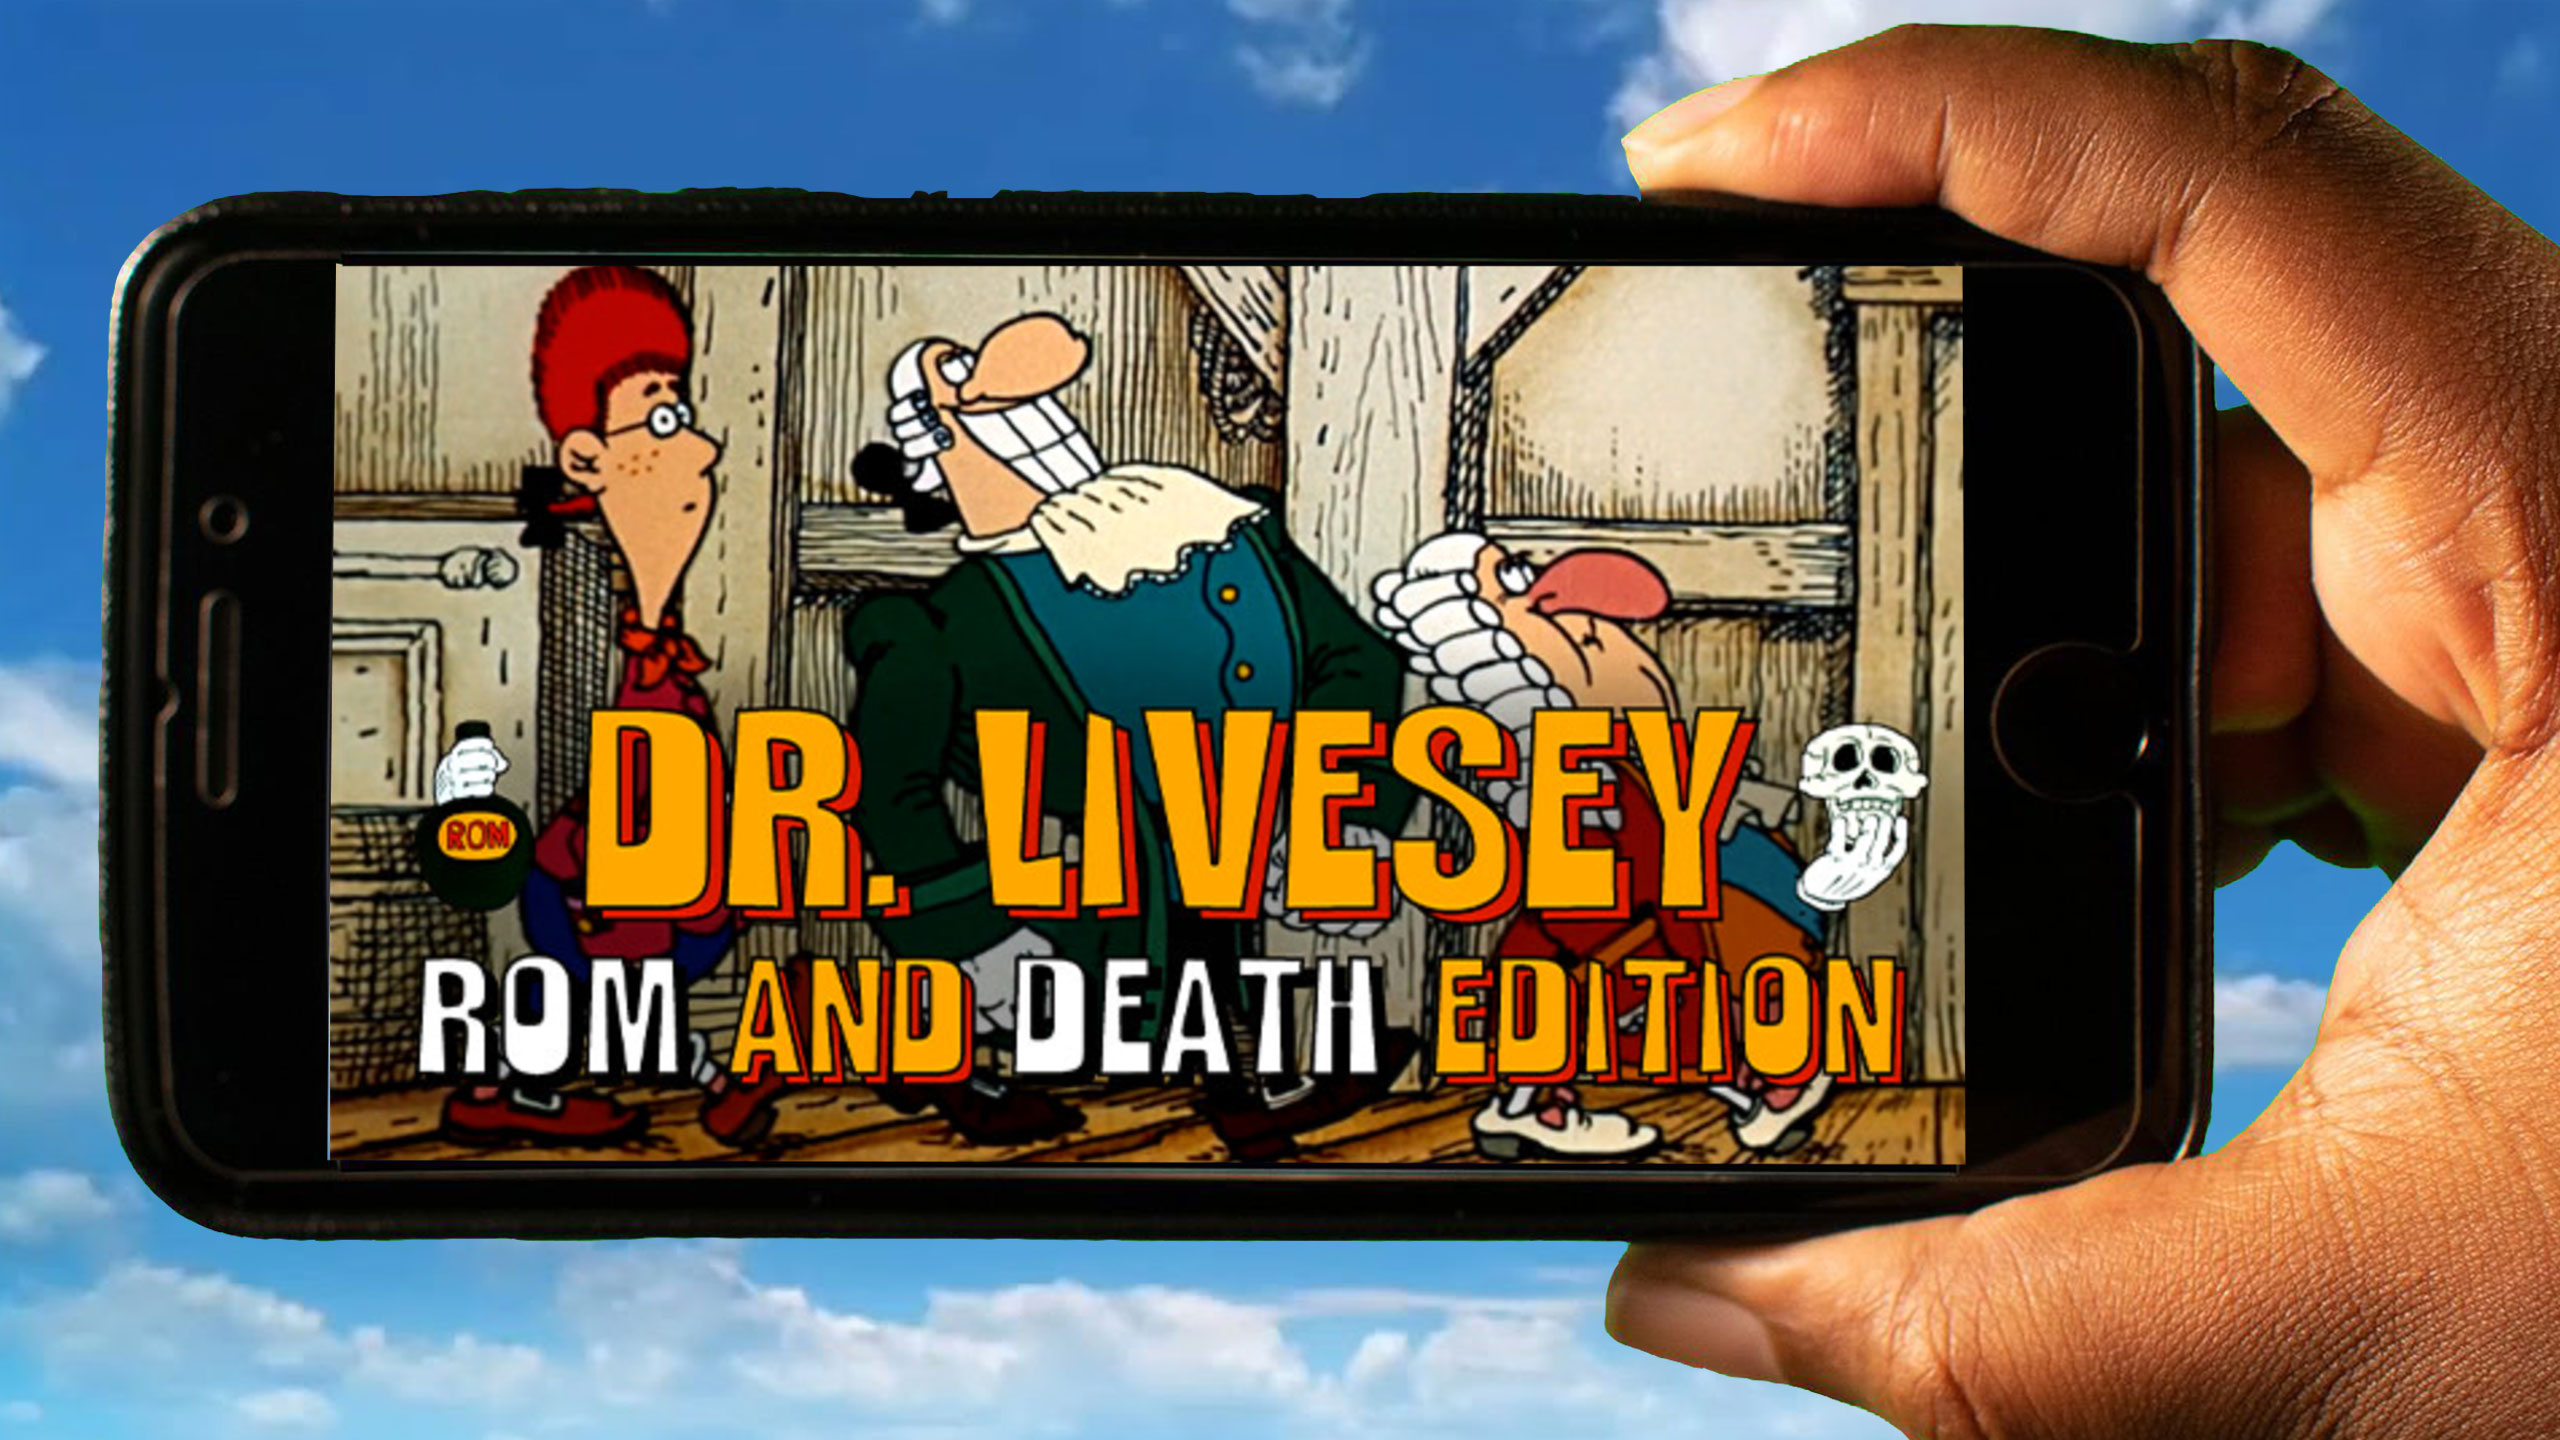 DR LIVESEY ROM AND DEATH EDITION - OFFICIAL STEAM TRAILER 